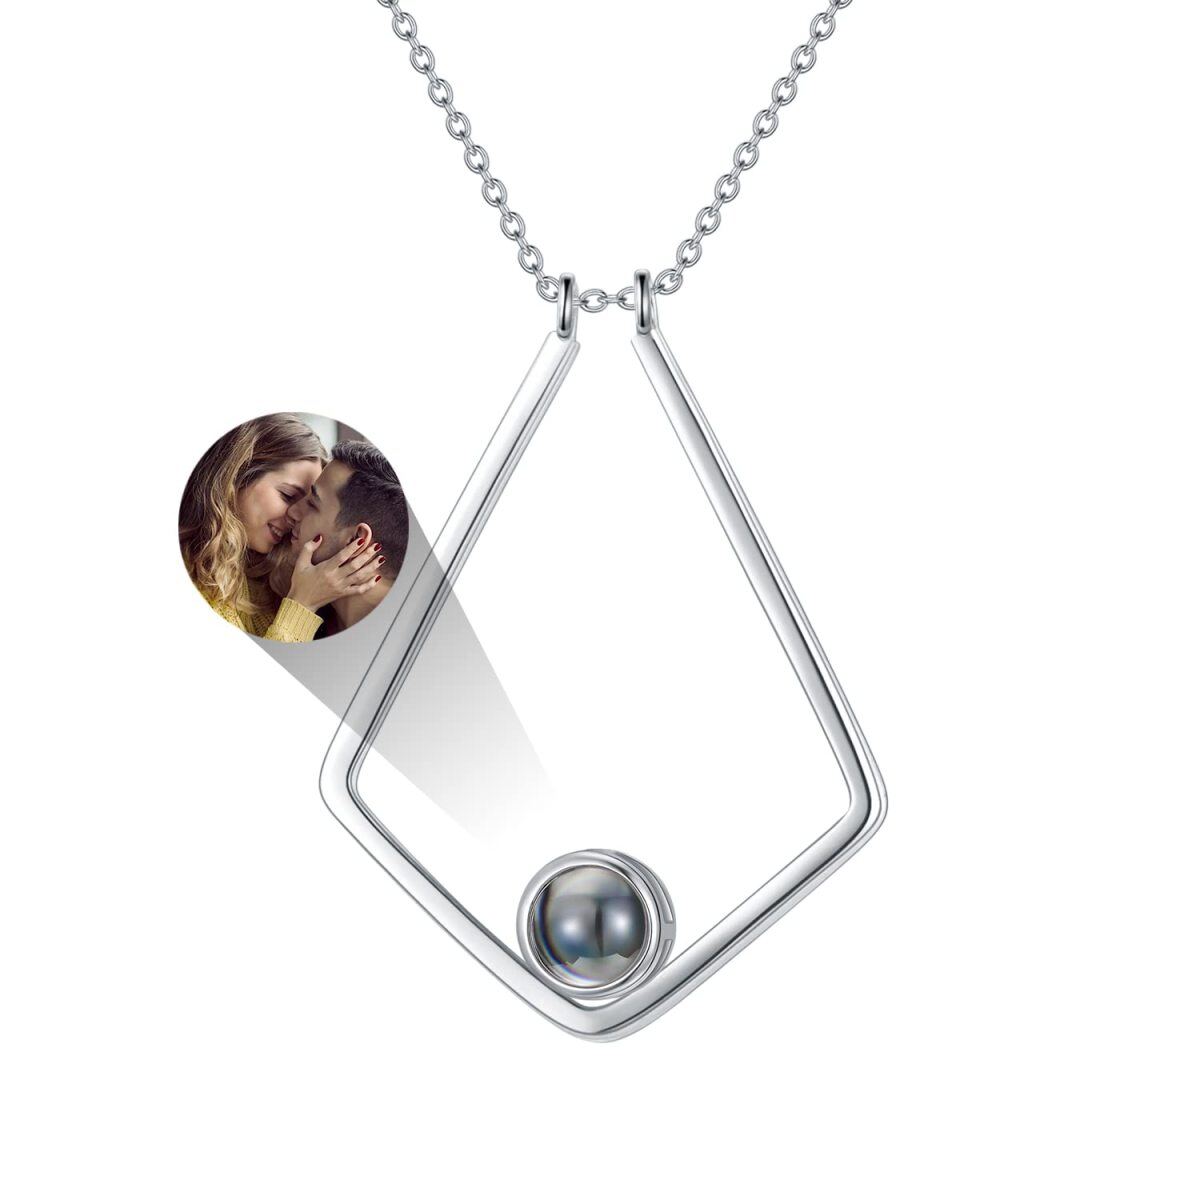 Sterling Silver Circular Shaped Projection Stone Projection Customization Pendant Necklace-1